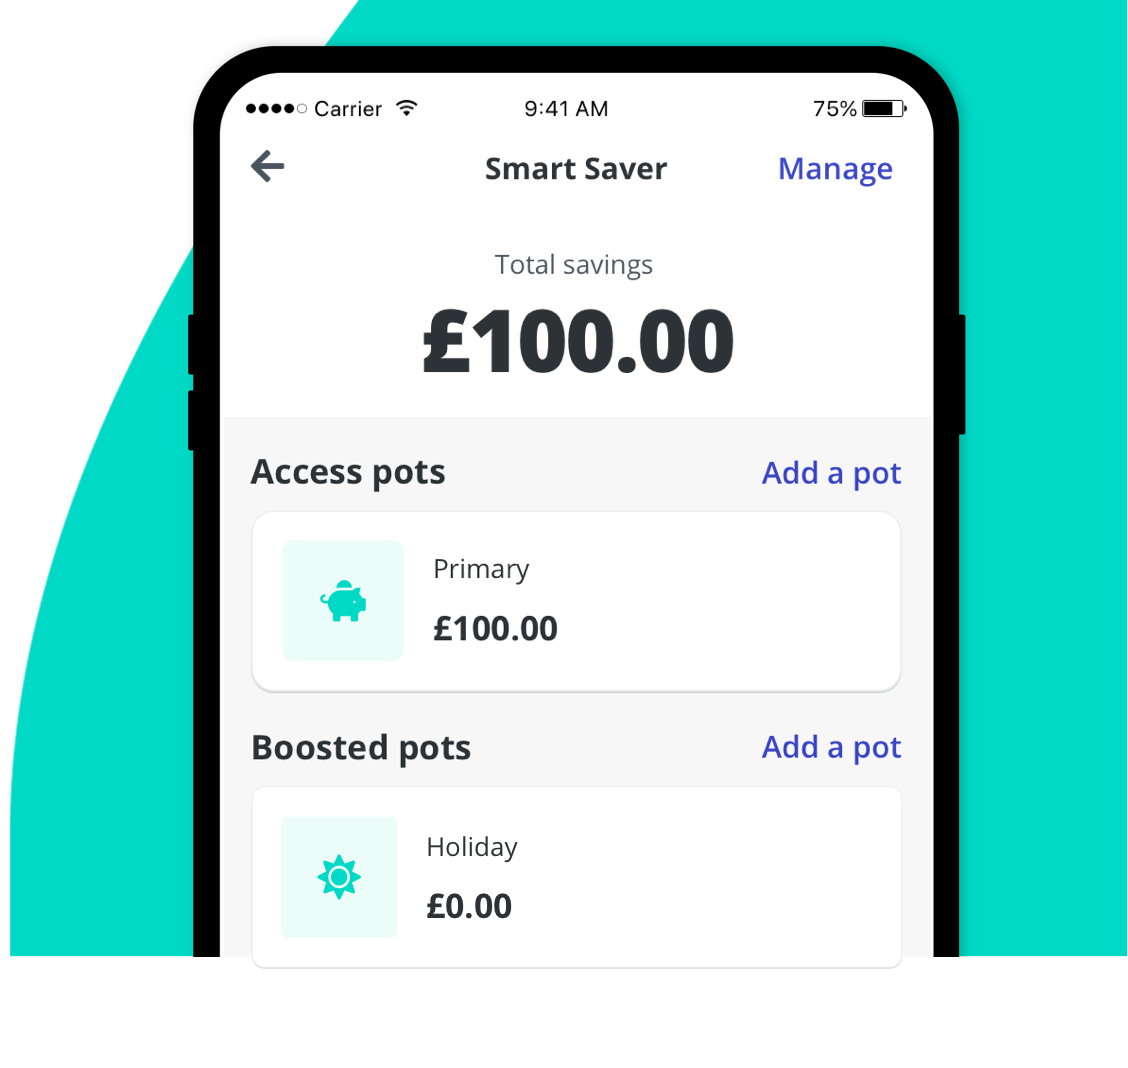 SmartSaver dashboard showing access and boosted pots